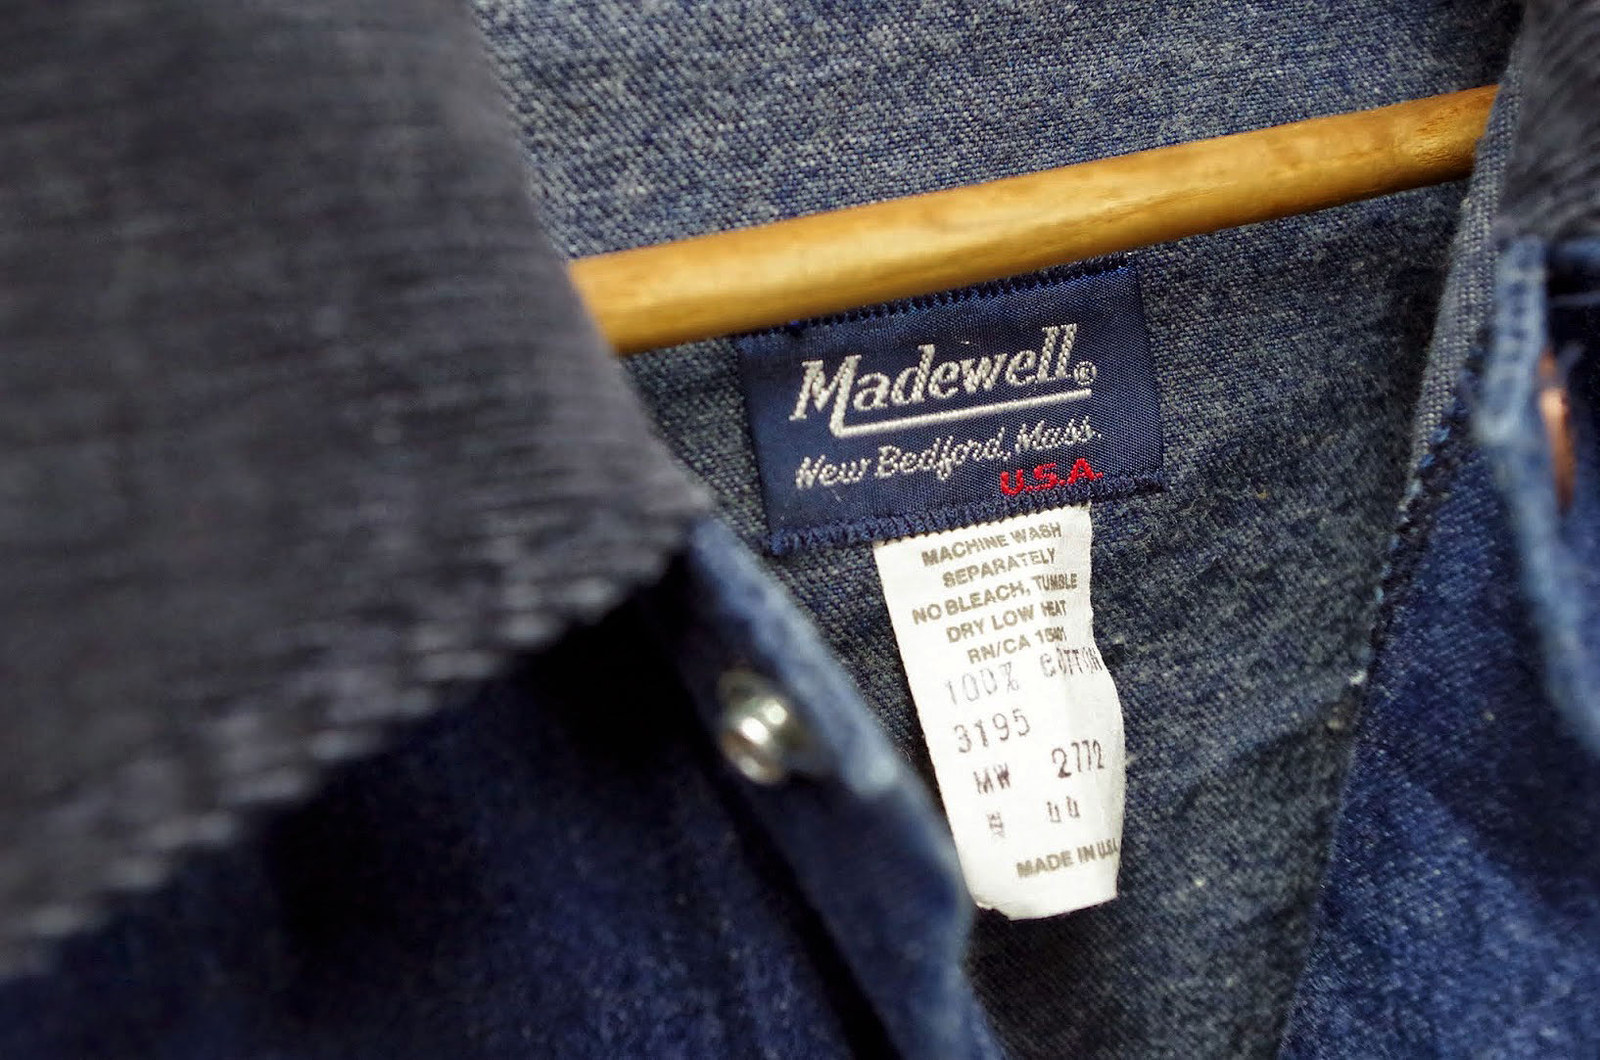 How Madewell Bought And Sold My Family's History - BuzzFeed News